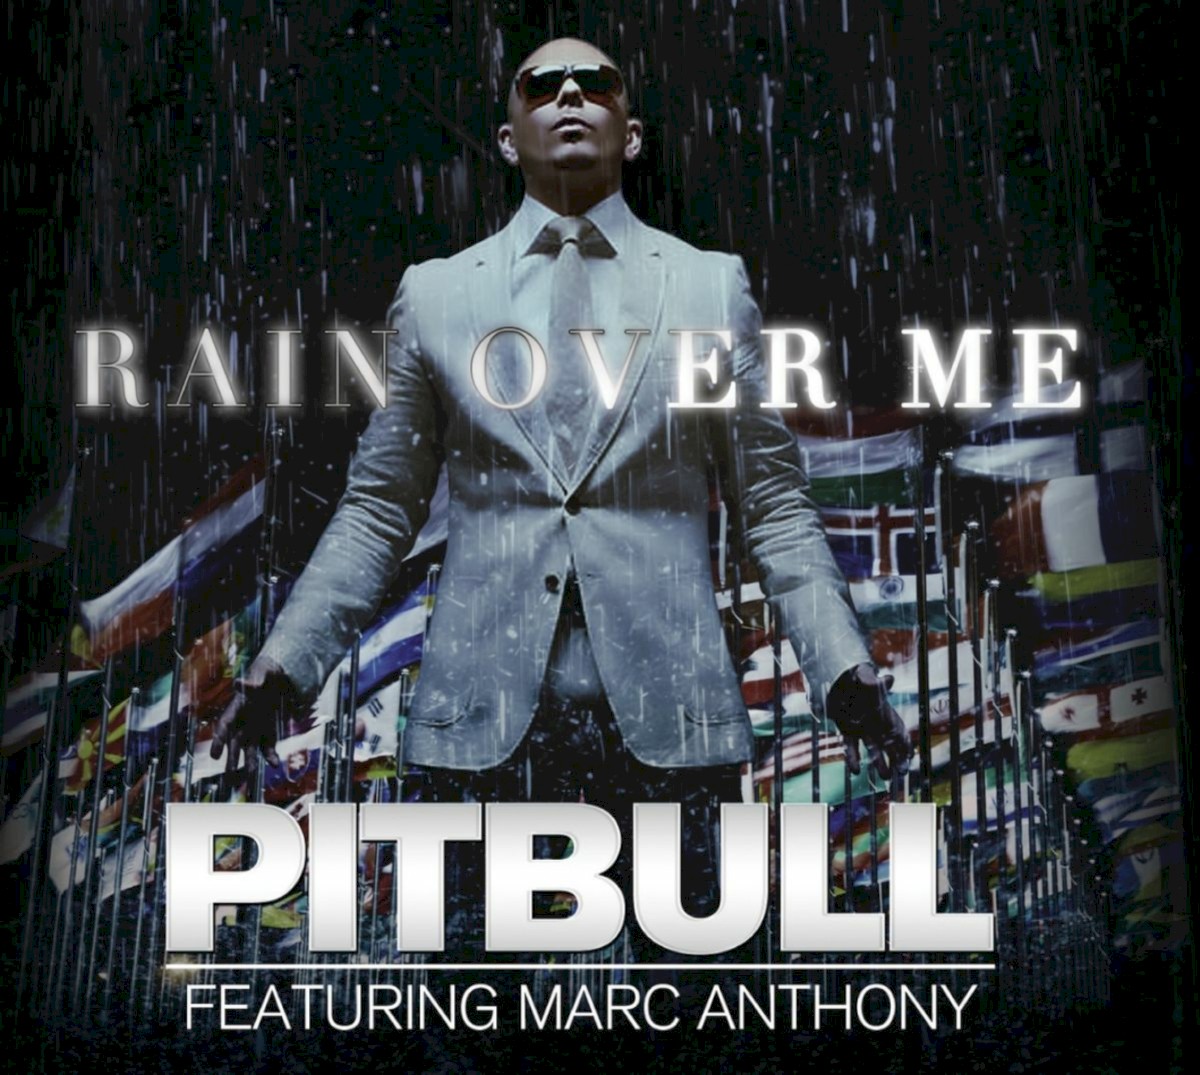 Pitbull ft. featuring Marc Anthony Rain Over Me cover artwork